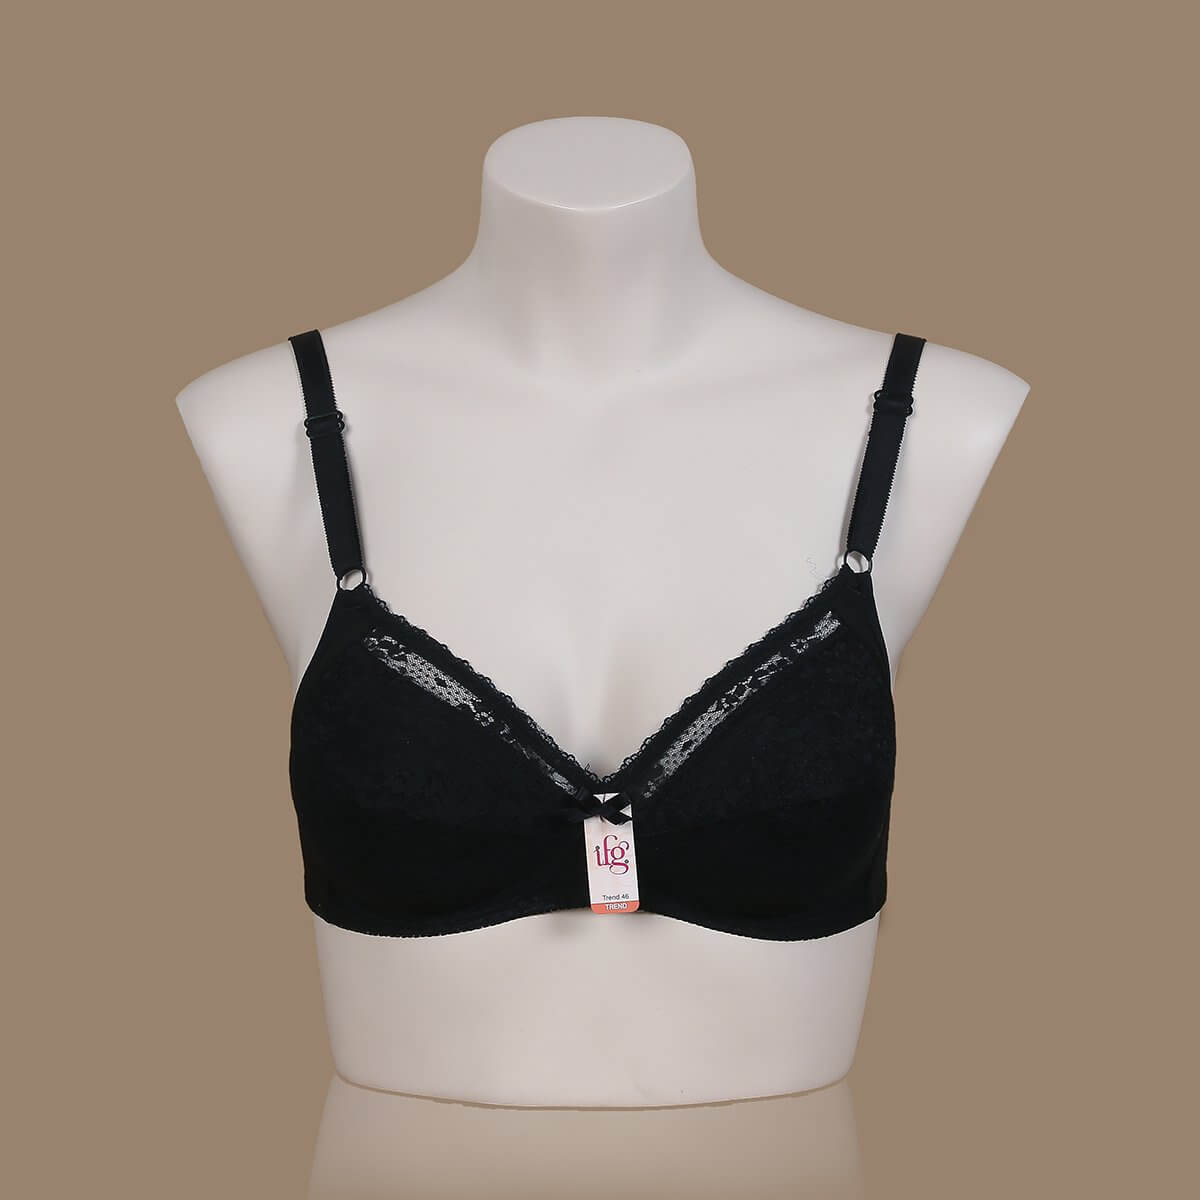 Trend 46 - IFG Bras - Mobicity®